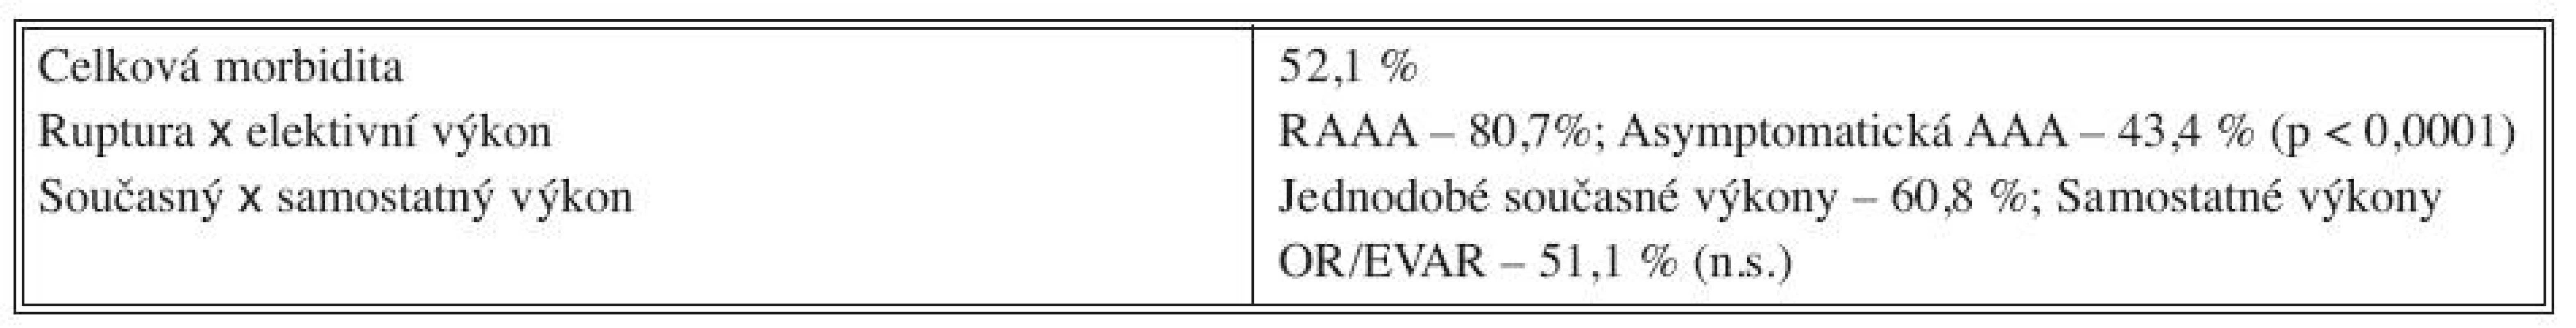 Třicetidenní morbidita nemocných s AAA
Tab. 3. 30-day morbidity rate in patients with abdominal aortic aneurysms